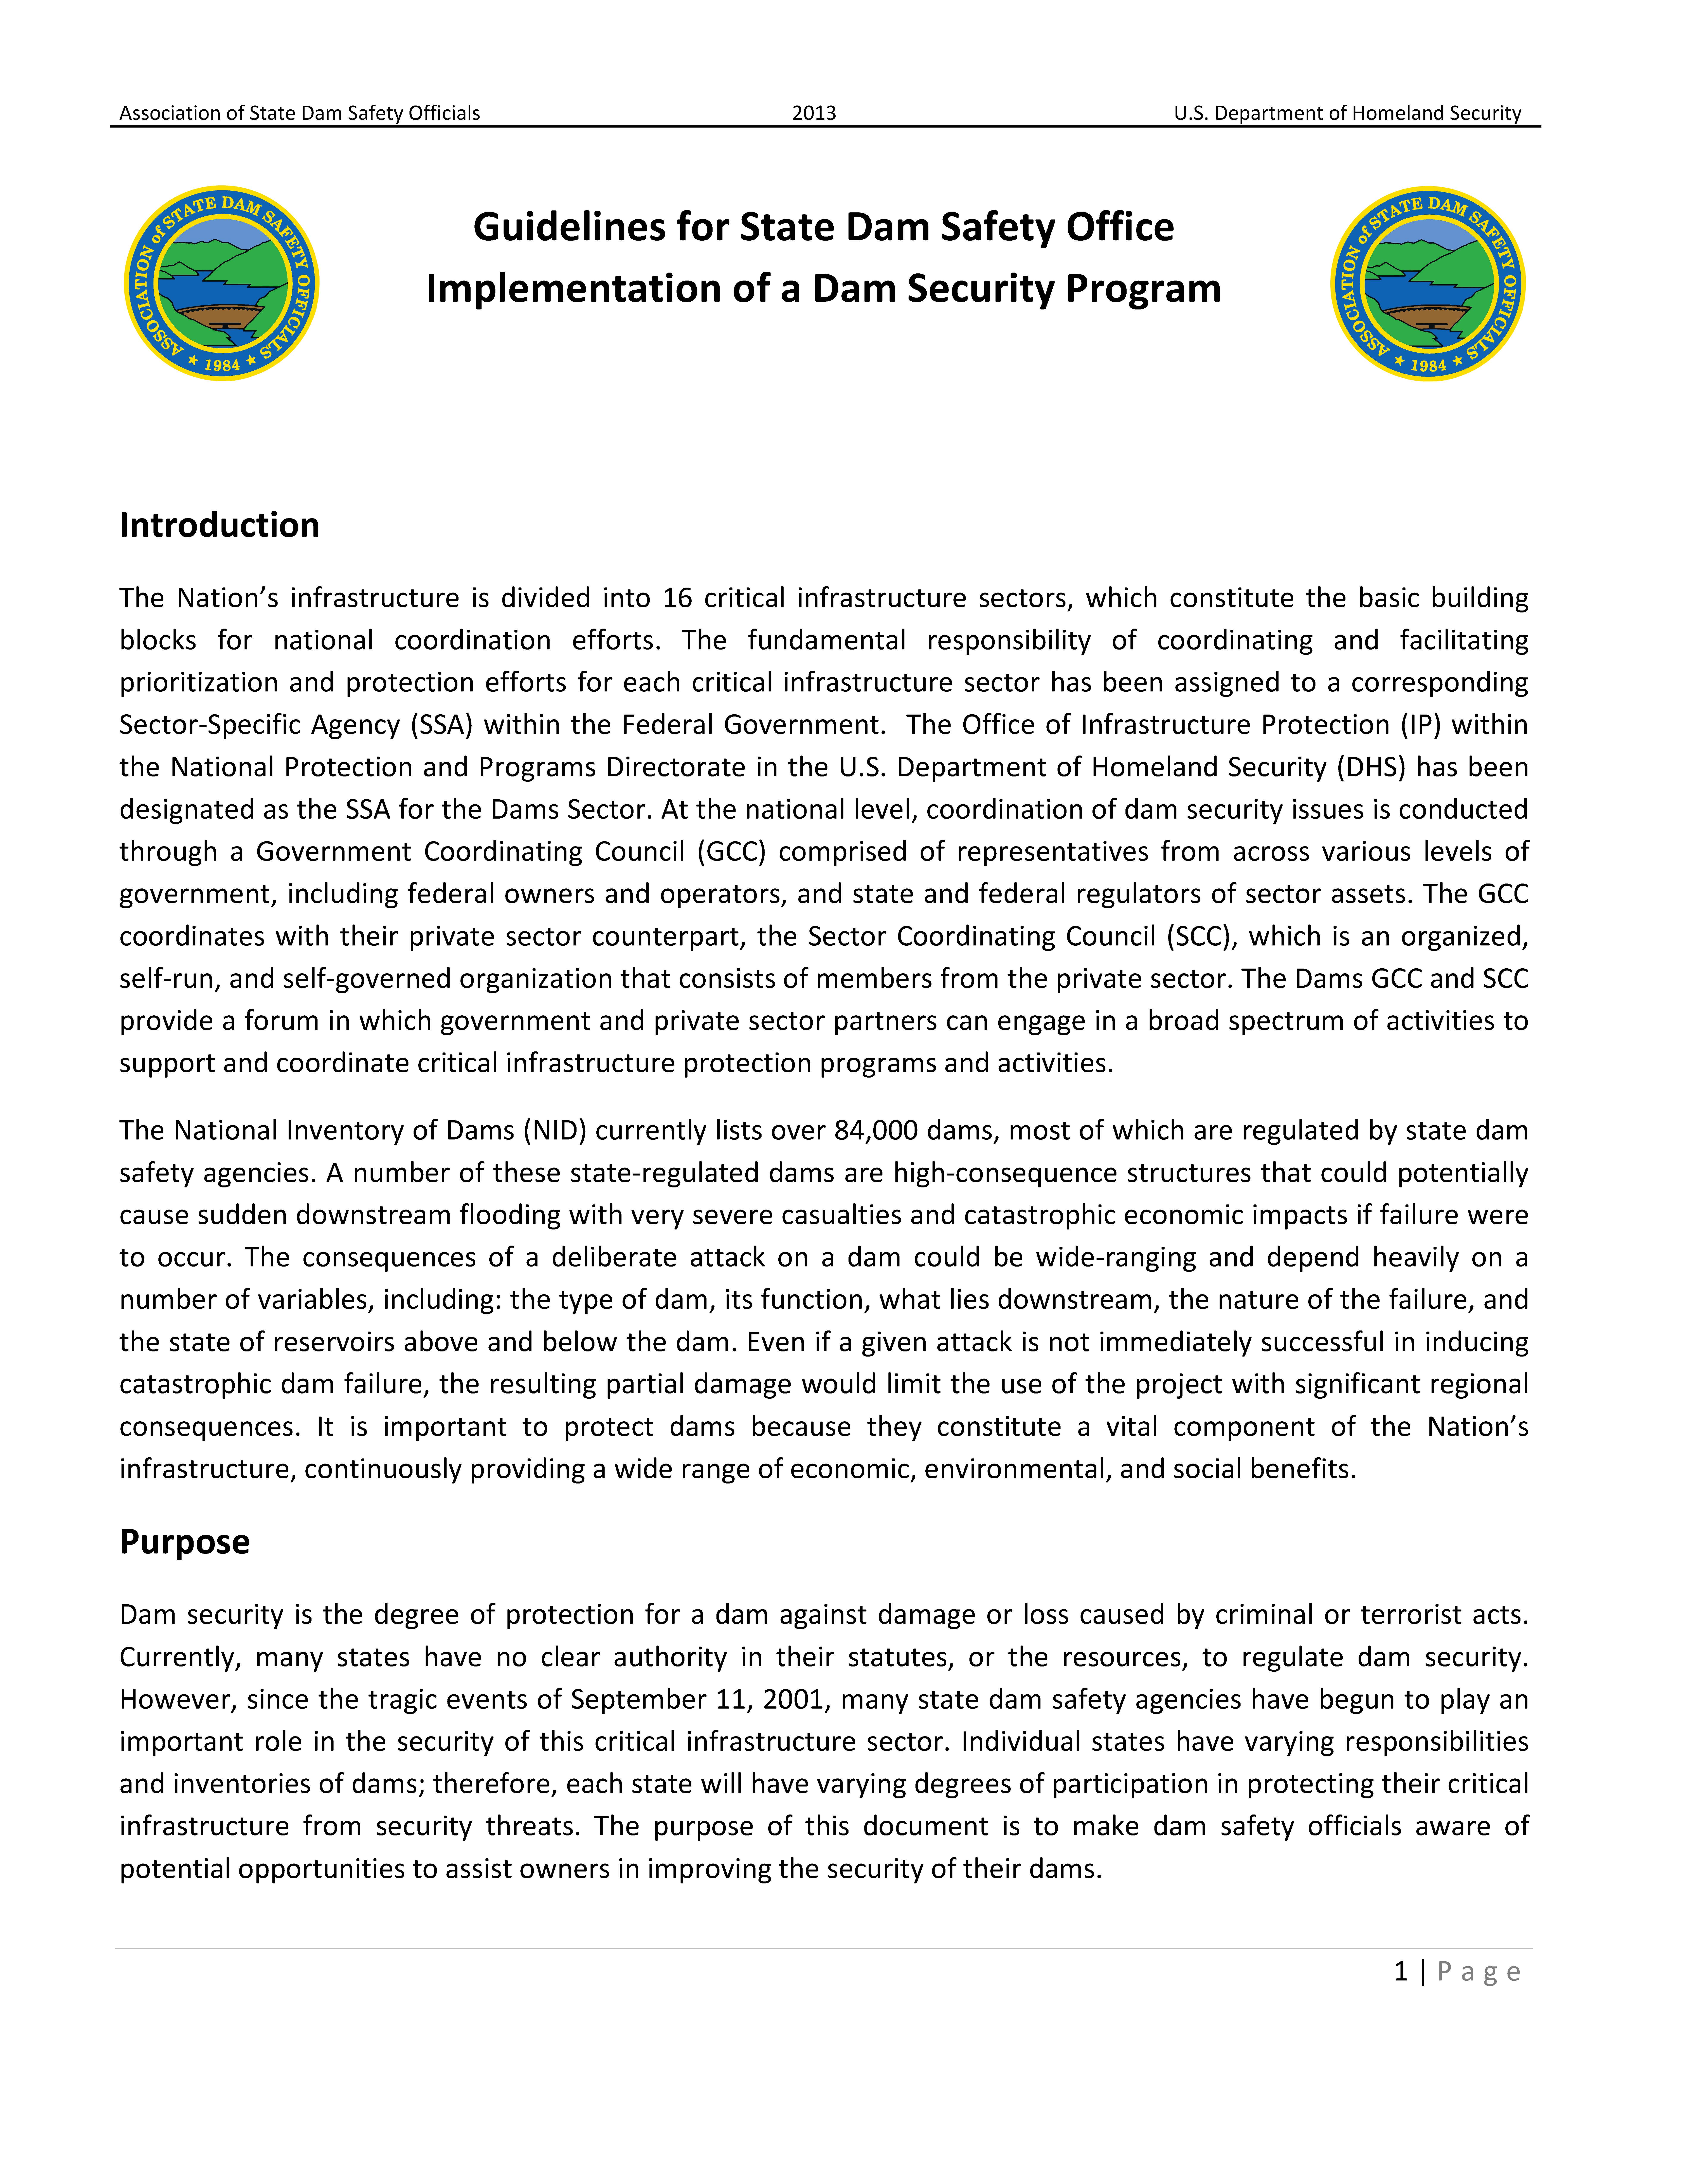 ASDSO State Security Plan - Final 23MAY2013.jpg